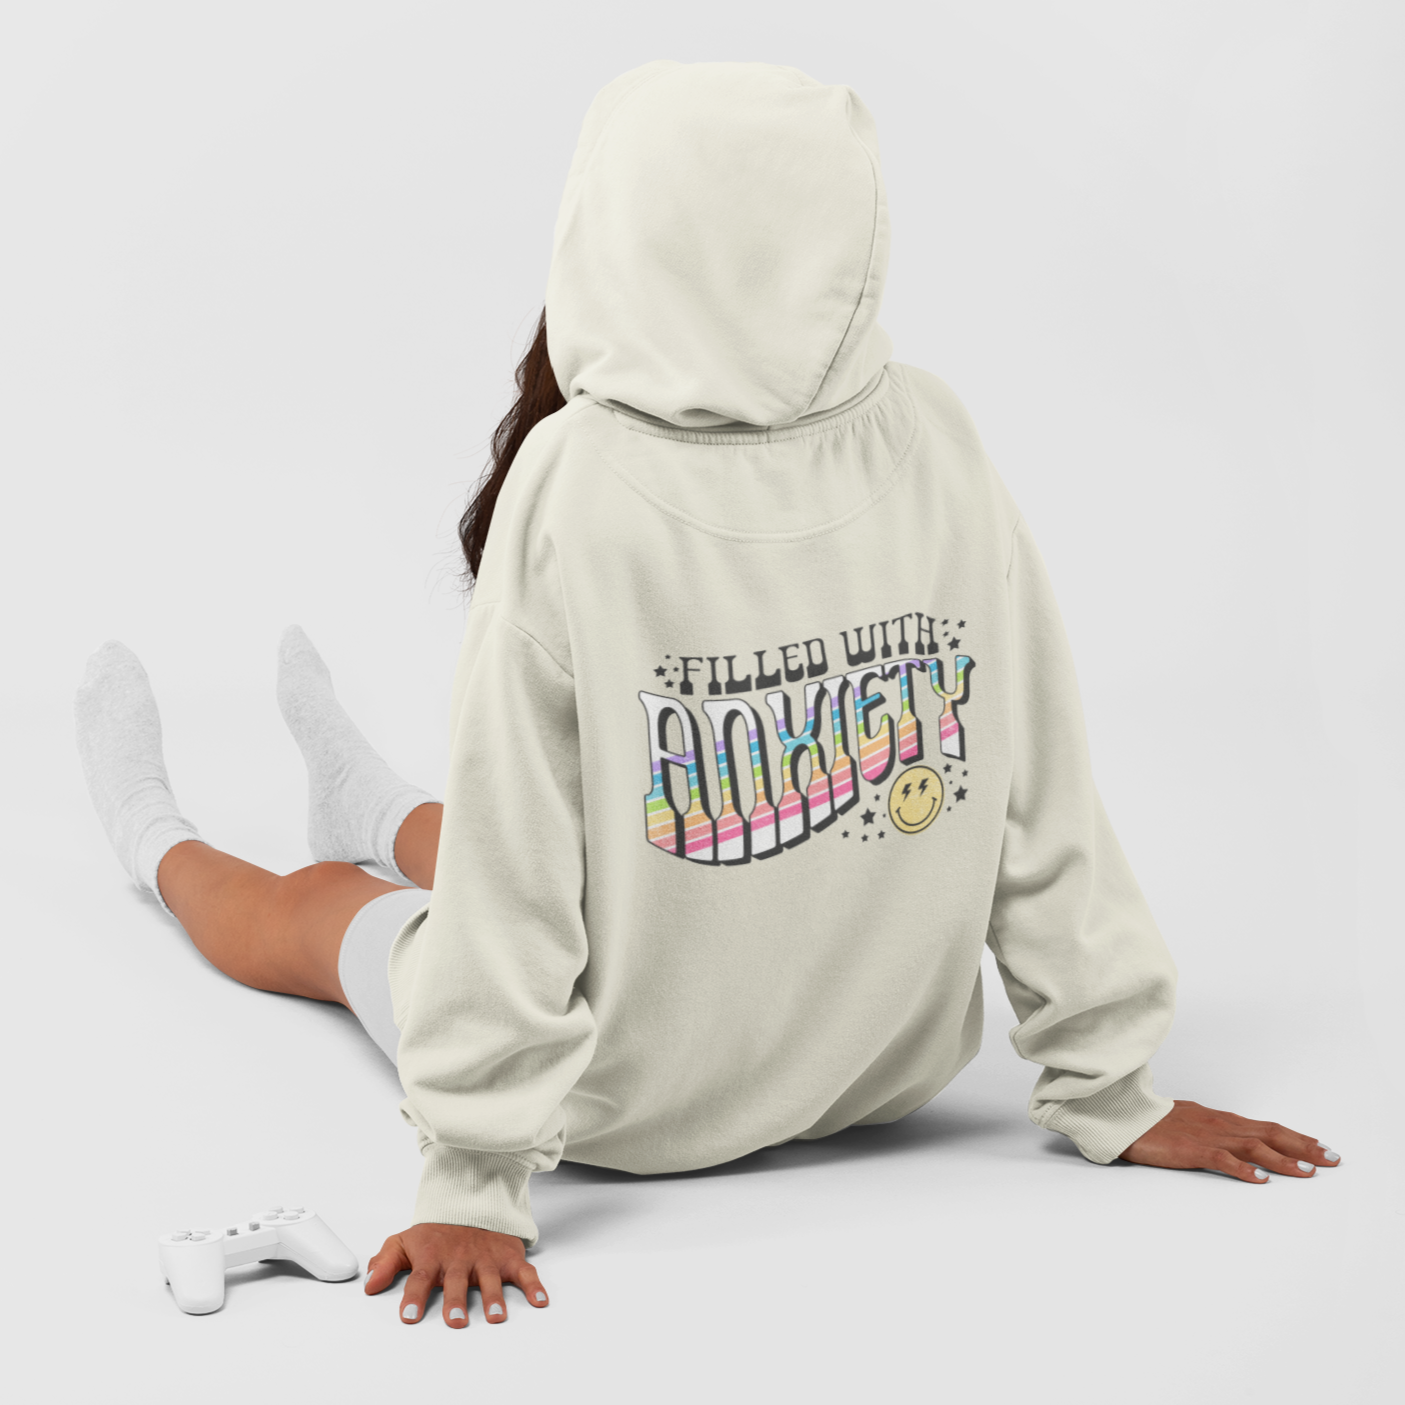 Filled with Anxiety- Full Color Heat Transfer